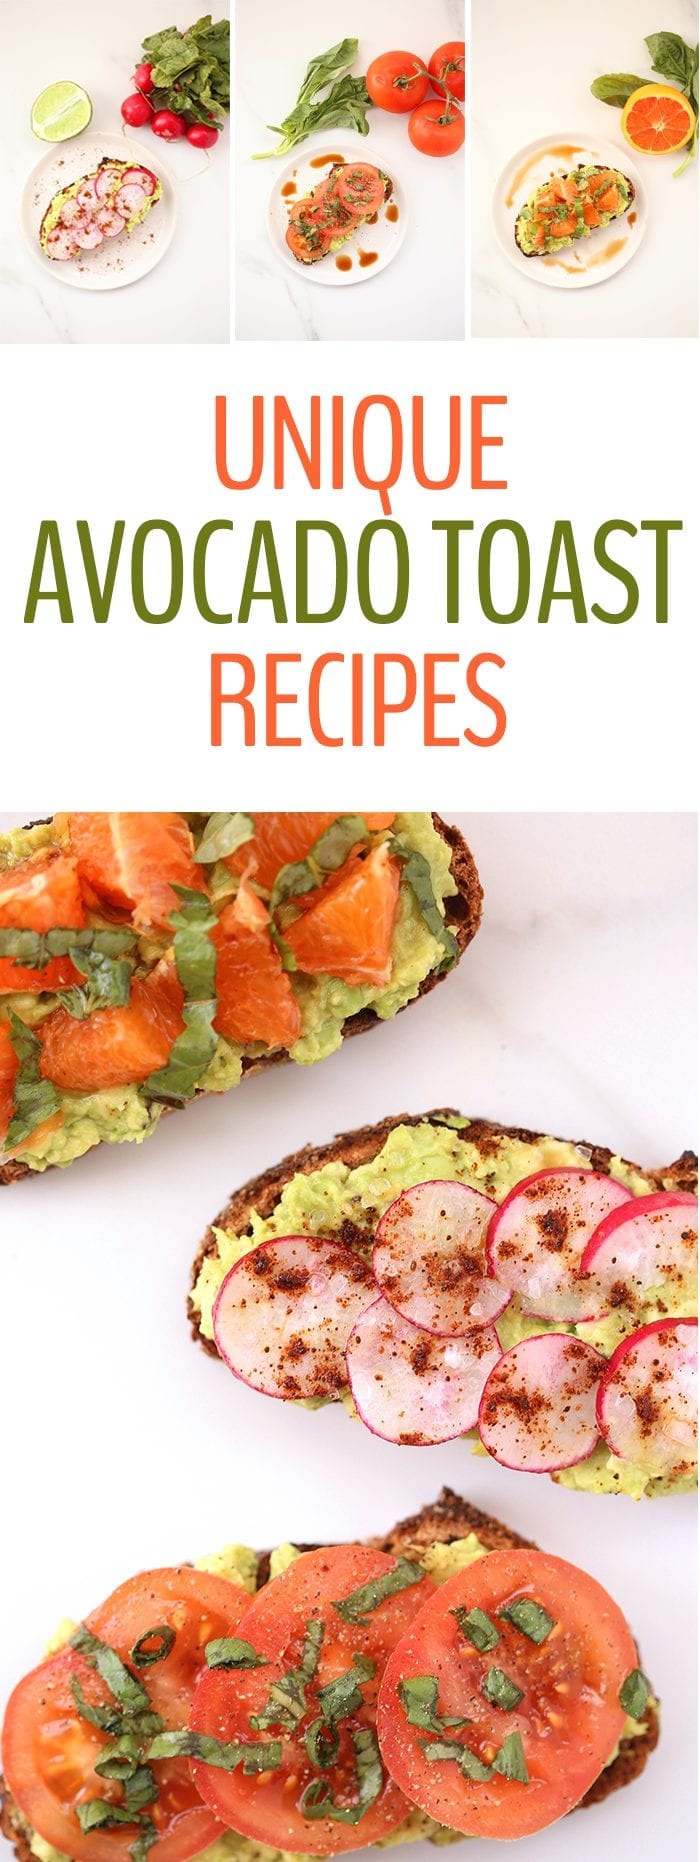 Change up your toast game with these Unique Avocado Toast Recipes. Add some spice, flavor and even a sweet twist to kick your avocado toast up a notch! The ultimate healthy breakfast, lunch or snack!